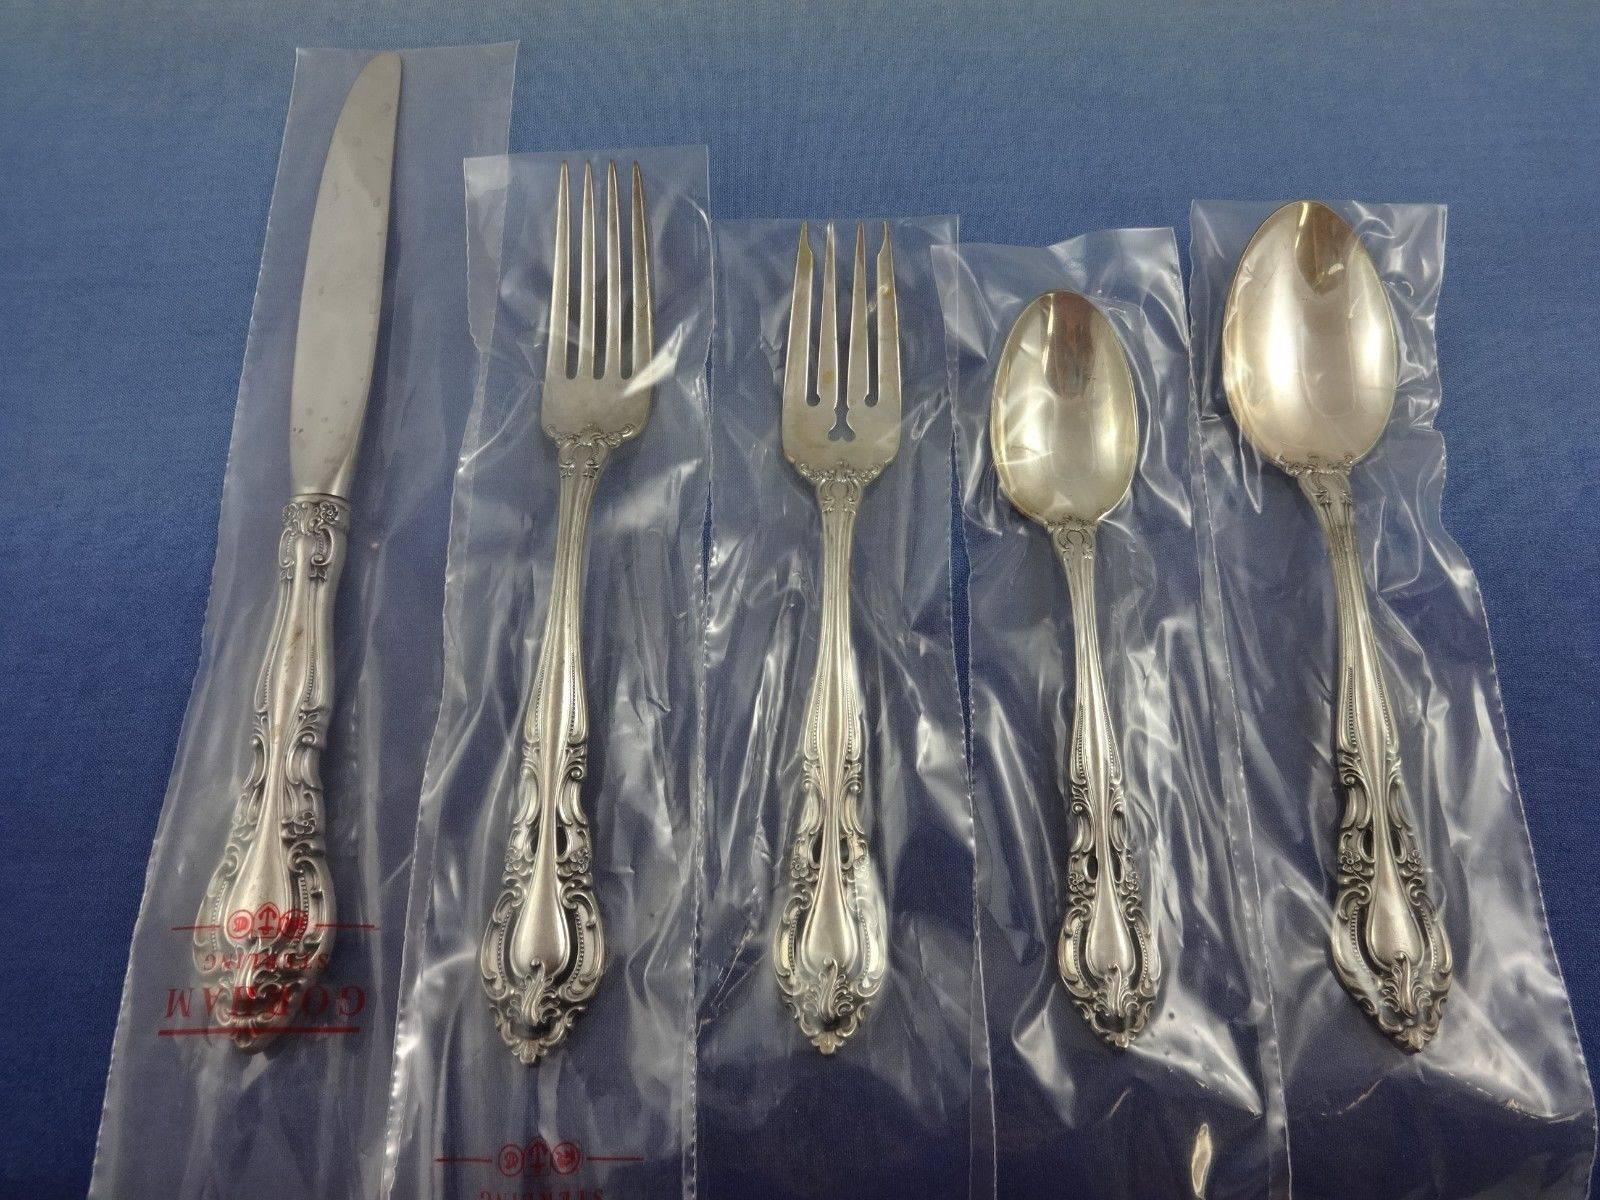 Baronial by Gorham sterling silver flatware set, 45 pieces. This set appears to be unused and most pieces are still in the factory sleeves! This set includes: 

Eight place size knives, 9 1/4